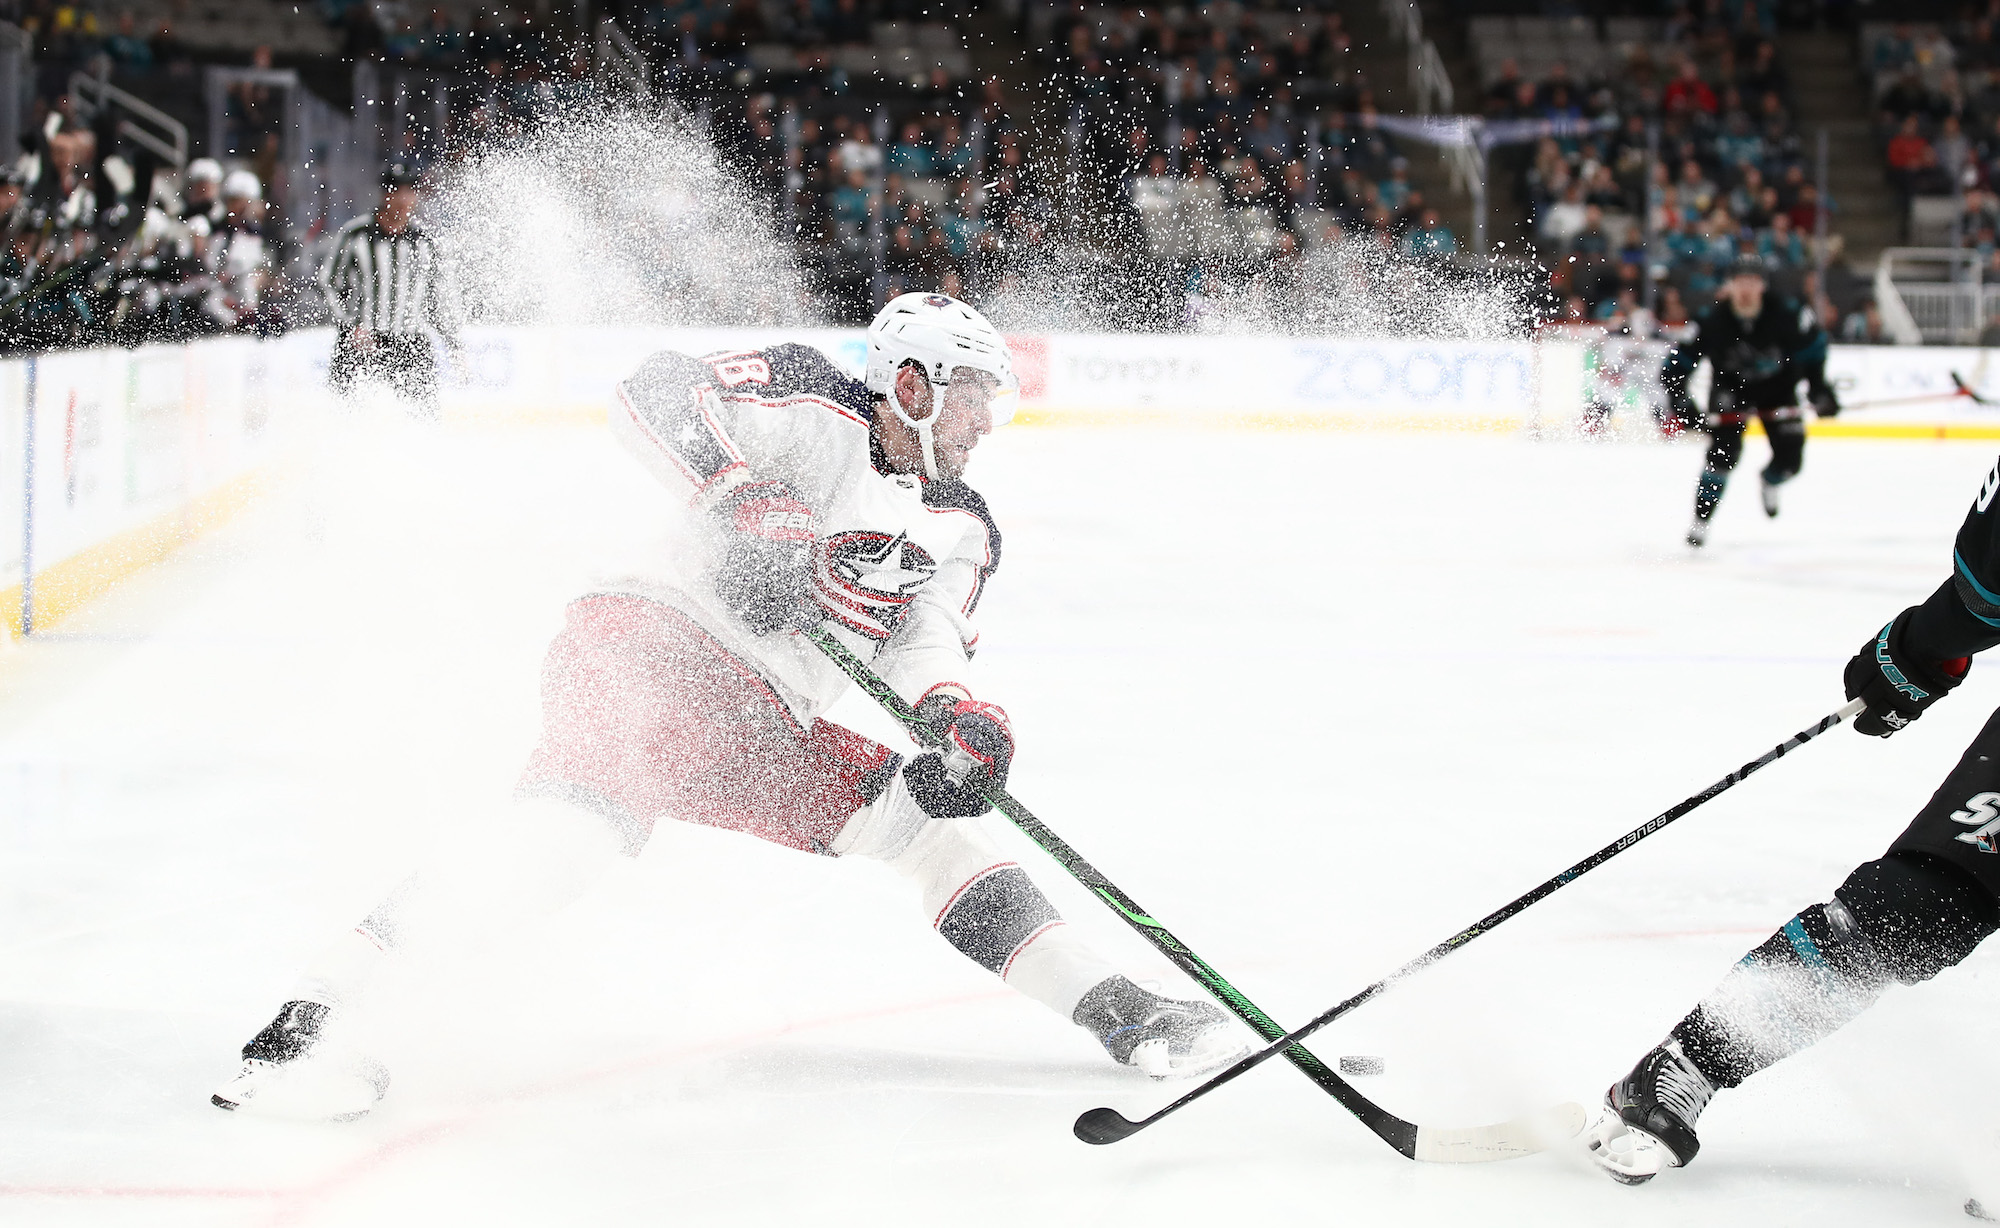 SAN JOSE, CALIFORNIA - JANUARY 09: Pierre-Luc Dubois #18 of the Columbus Blue Jackets stops on the ice during their game against the San Jose Sharks at SAP Center on January 09, 2020 in San Jose, California. (Photo by Ezra Shaw/Getty Images)